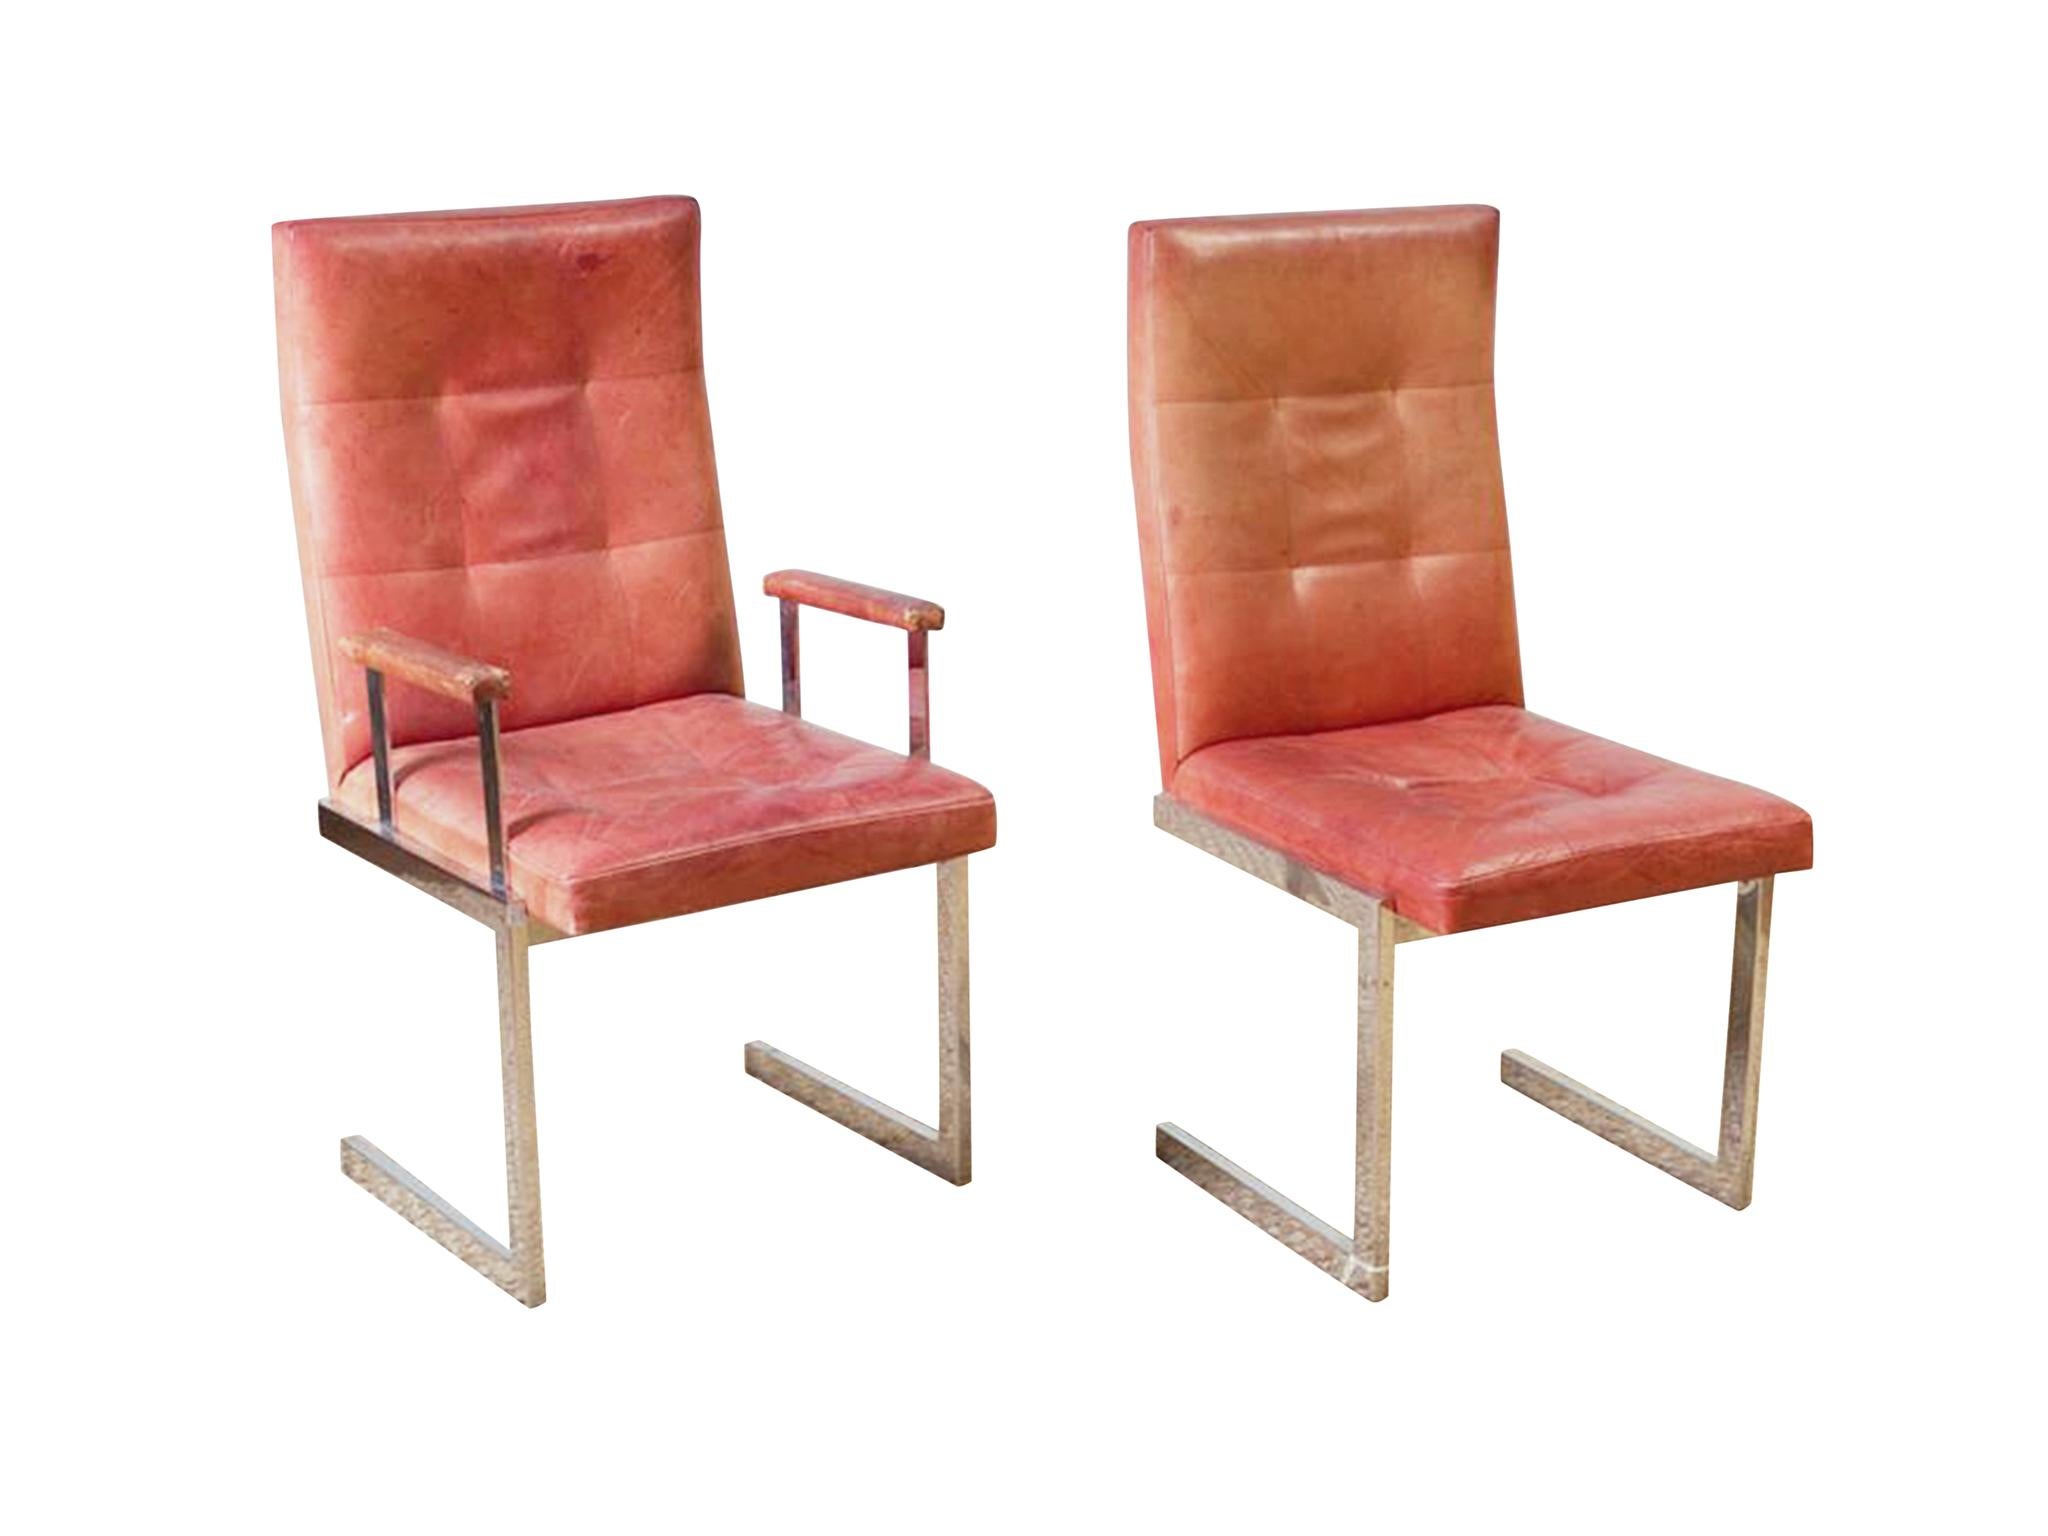 These are an ideal set of dining chairs that brings together the clean, functional lines of modern design and the elegance of Art Deco. The chairs were designed by Vladimir Kagan in the 1970s and consists of two armchairs and four side chairs. They